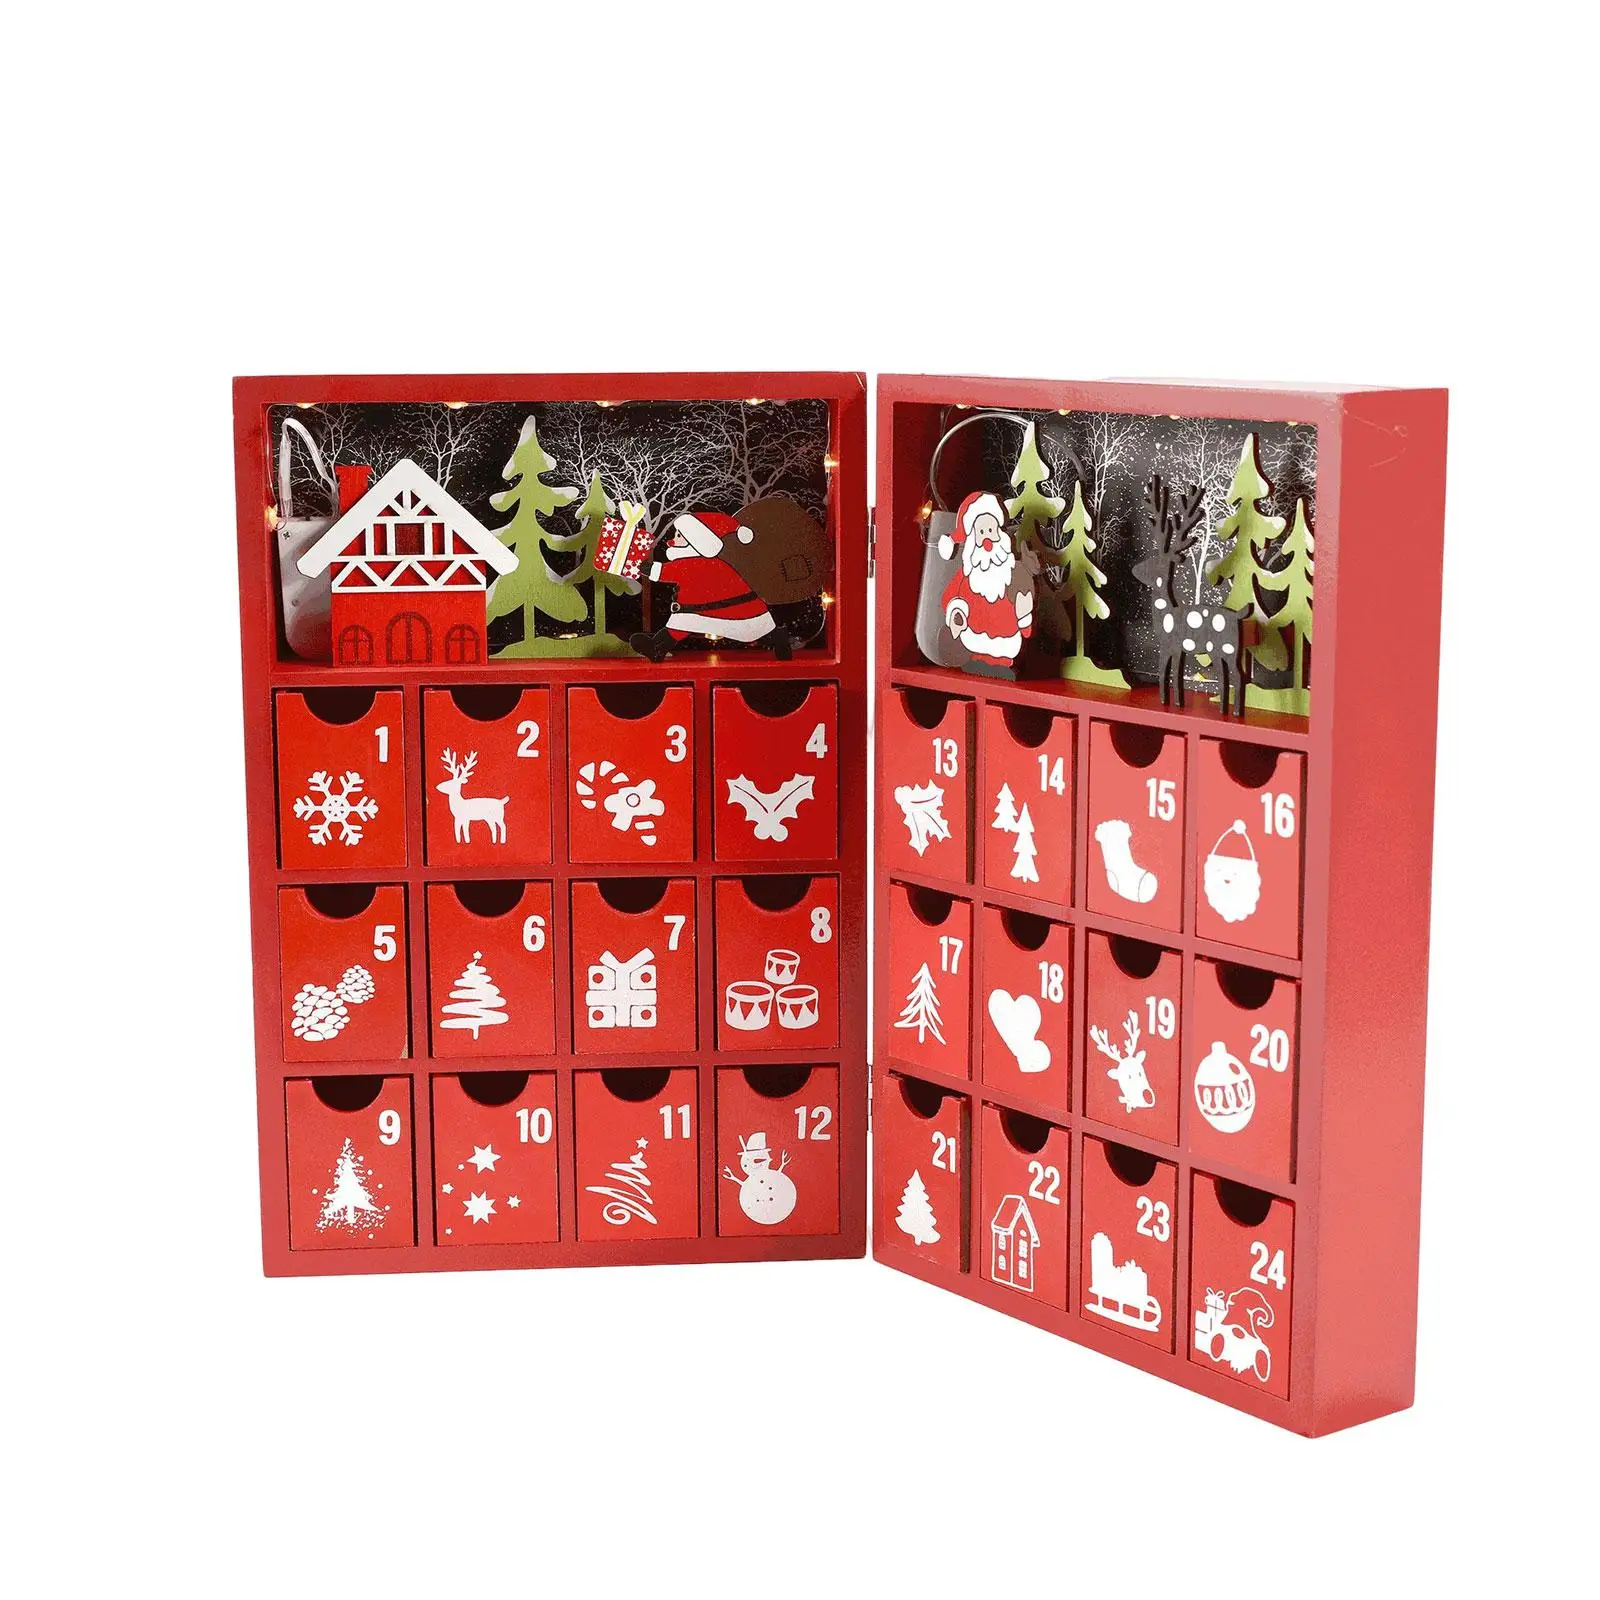 Fillable Calendar Box Santa Claus Pattern Candy Organizer with Storage Drawers Wood for Holiday Tabletop Home Xmas Decoration